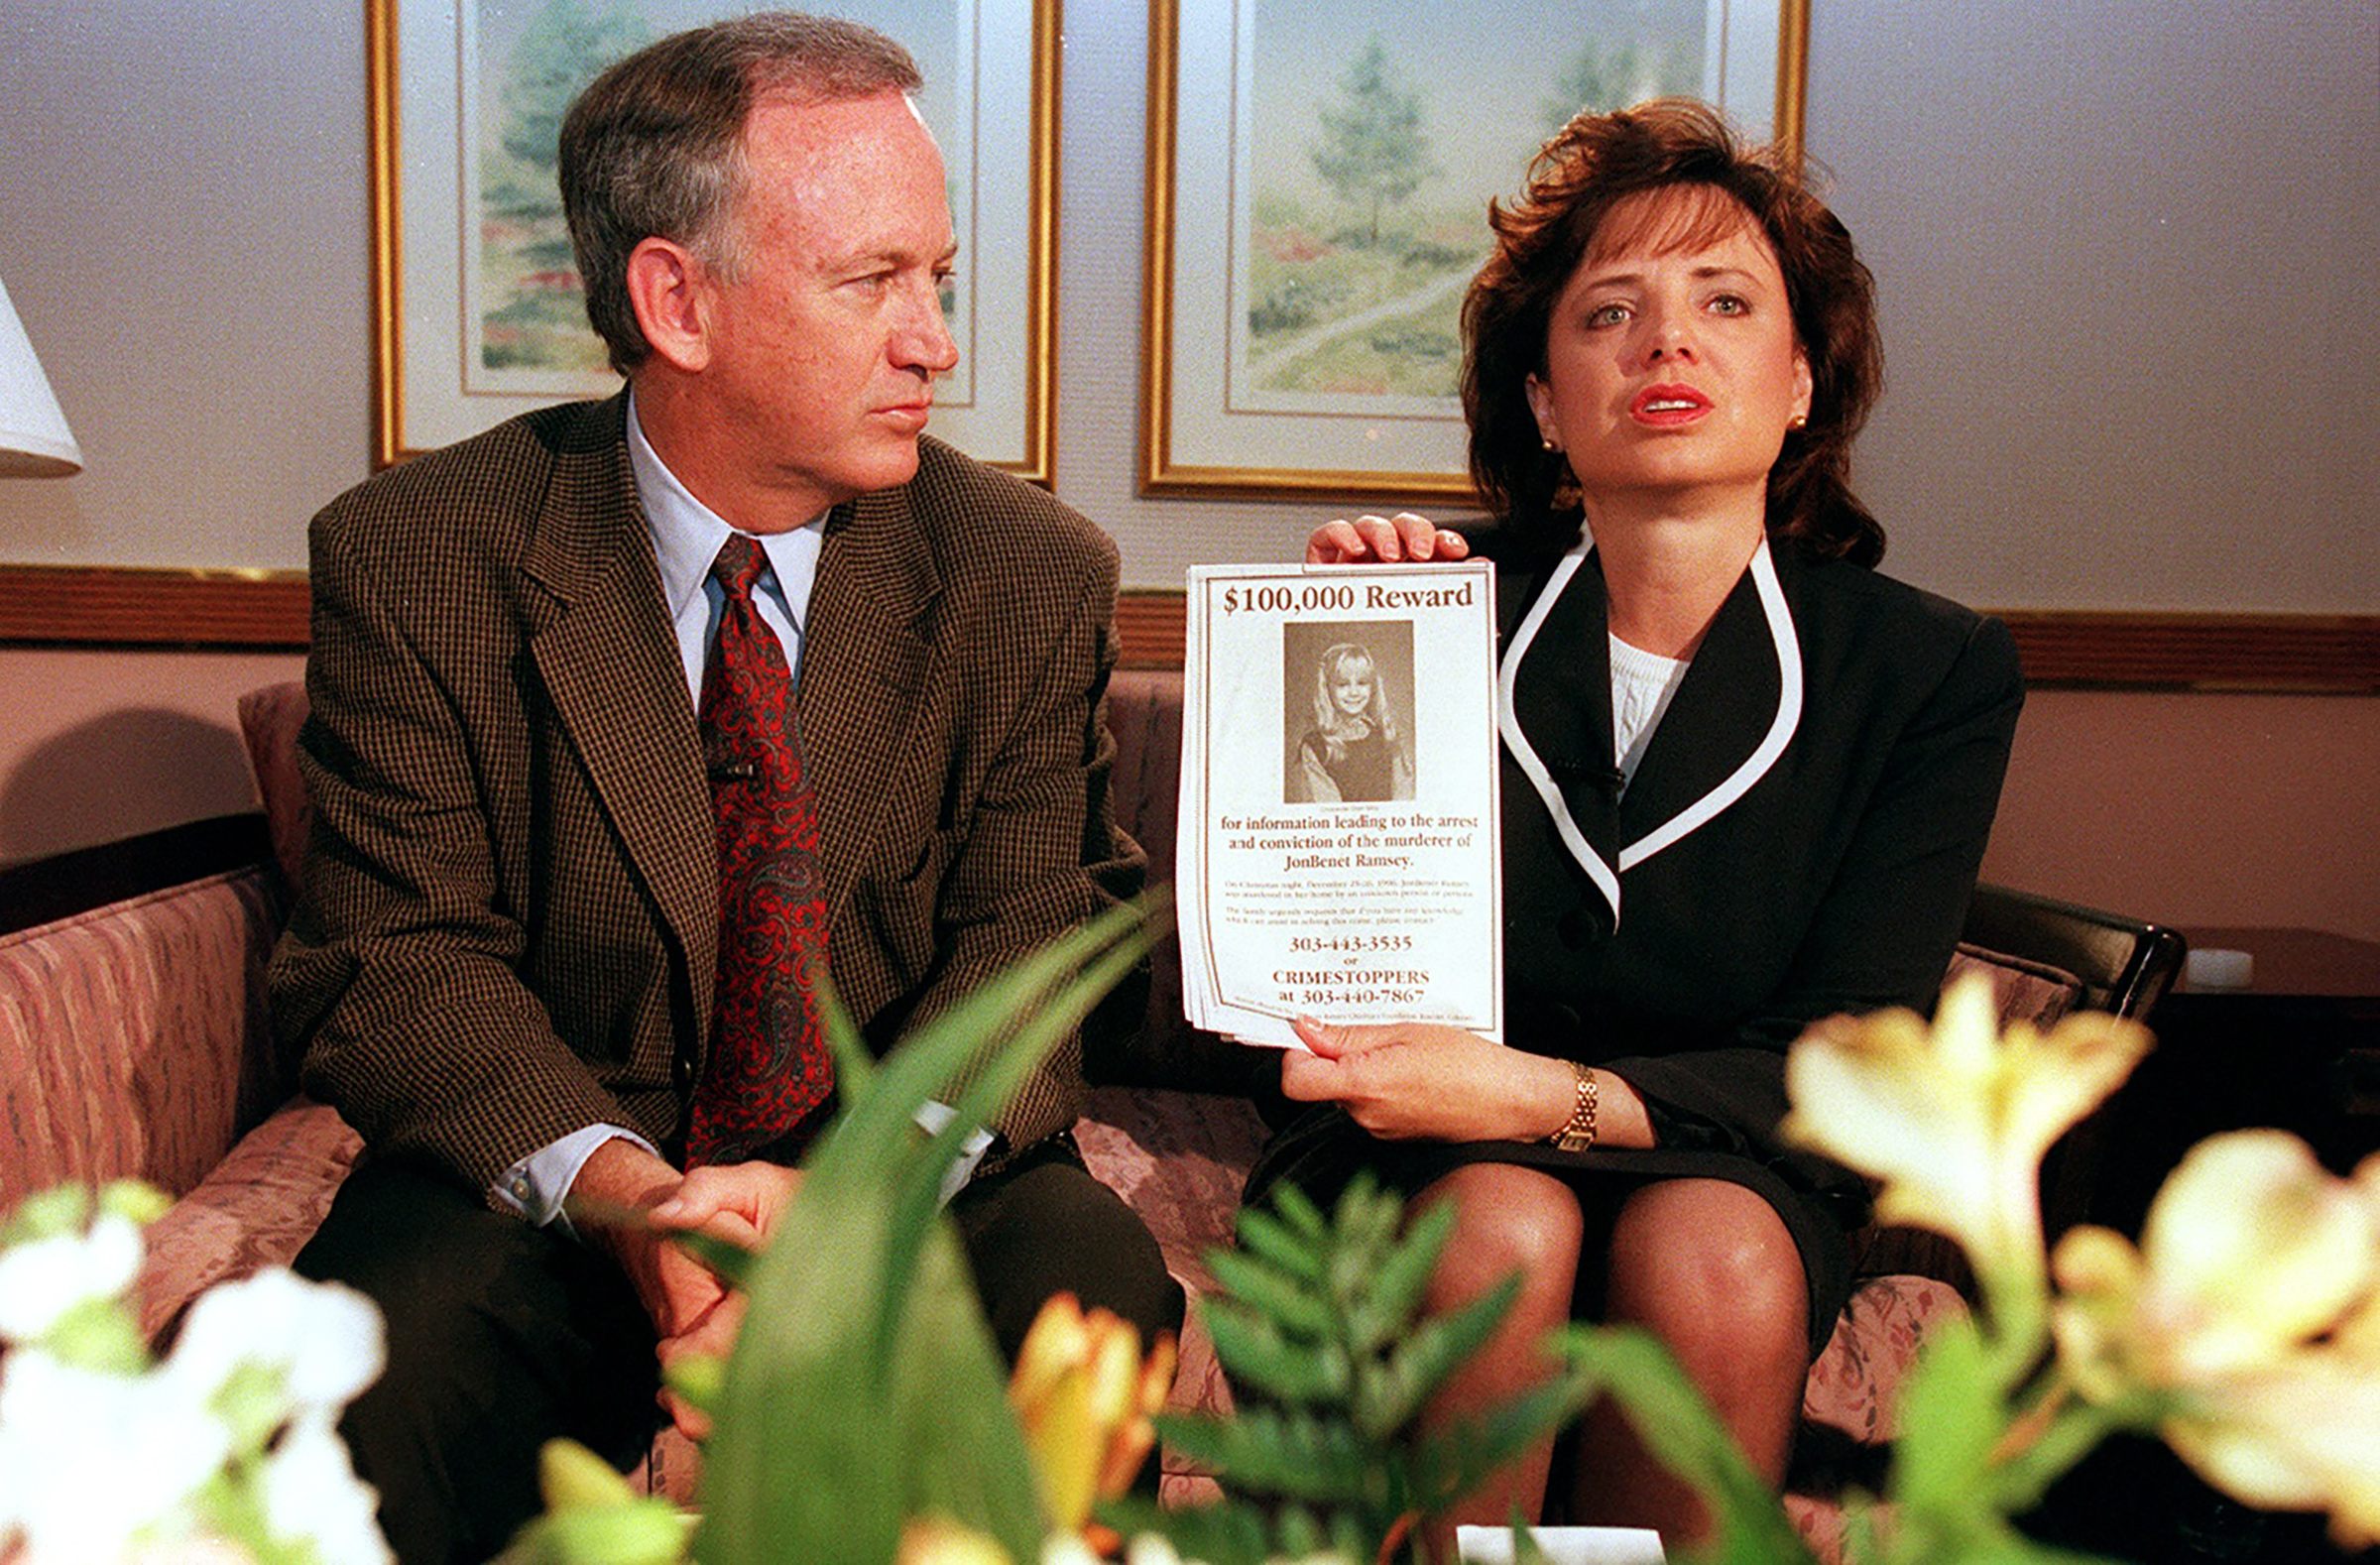 John and Patsy Ramsey, the parents of JonBenét Ramsey, meet with local Colorado media on May 1, 1997 in Boulder. Patsy holds up a reward sign for information leading to the arrest of their daughter's murderer. (Helen H. Richardson—The Denver Post/Getty Images)